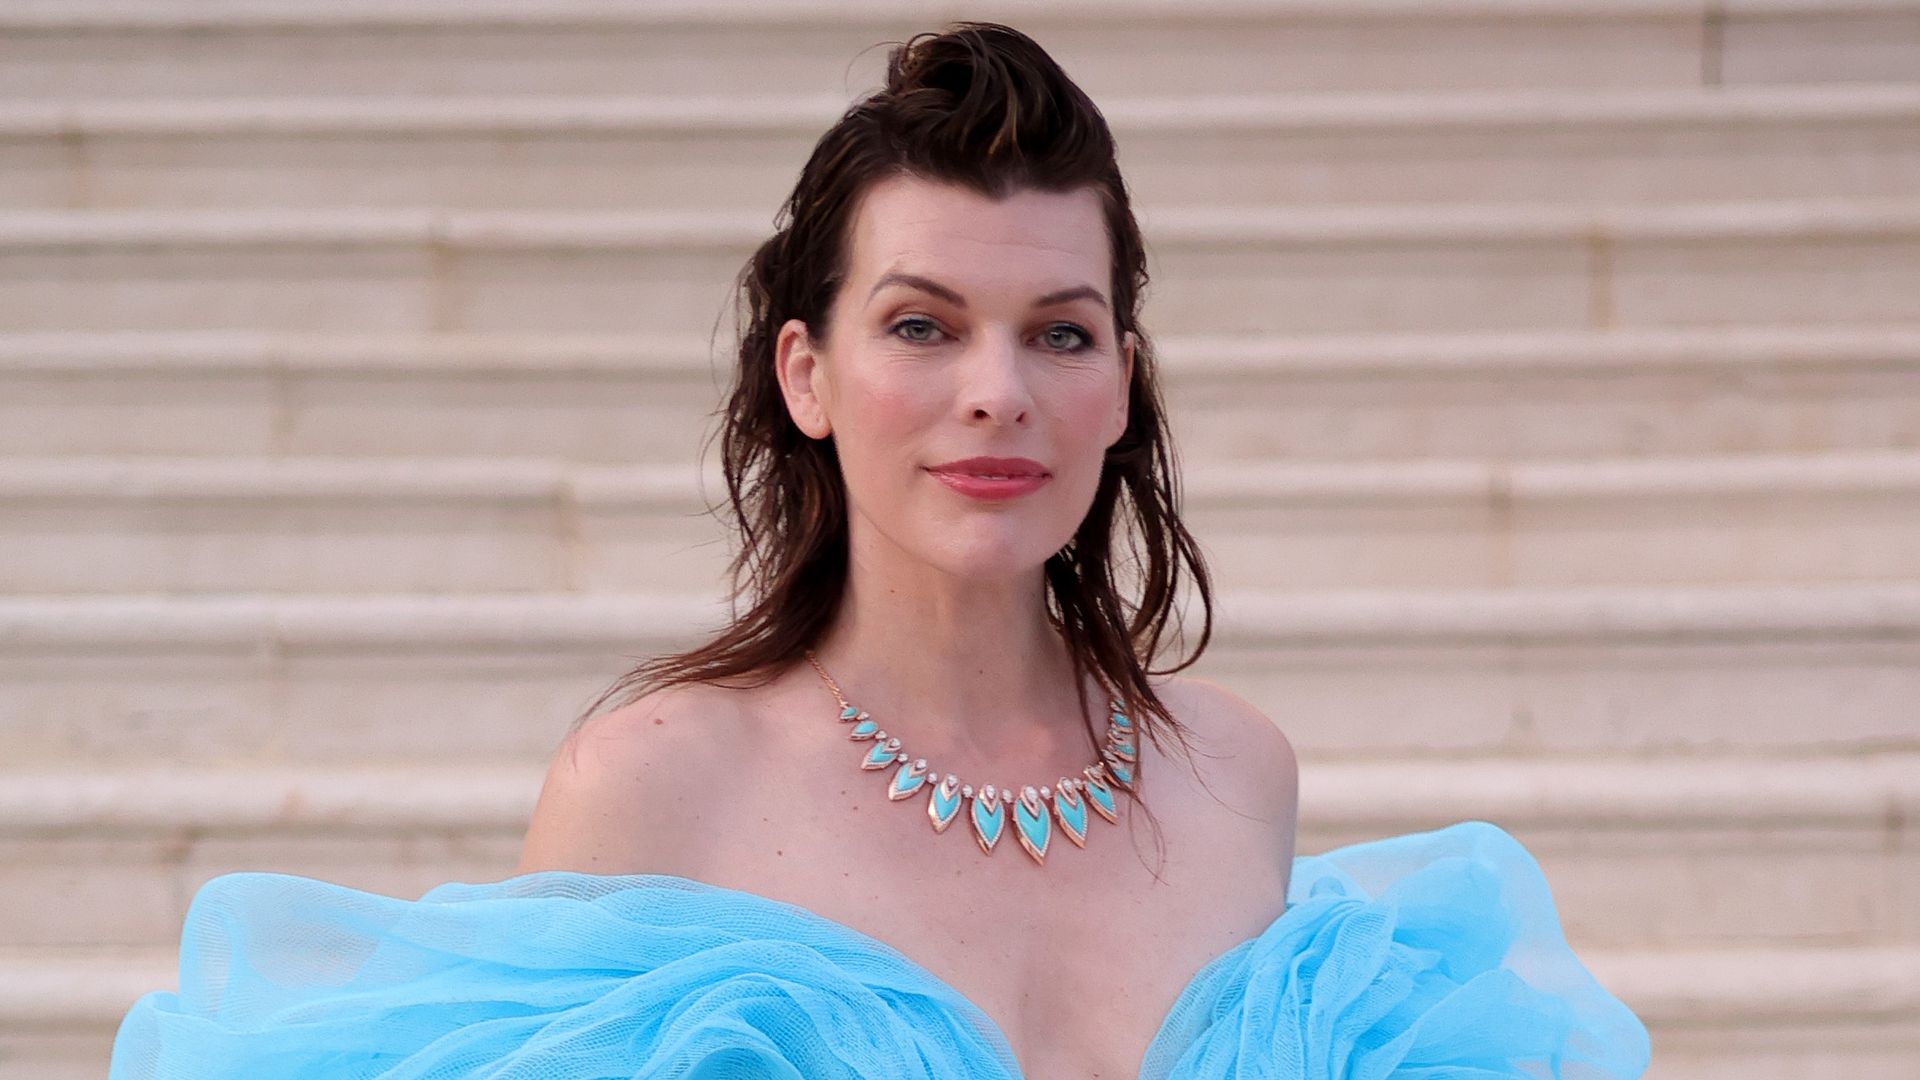 Milla Jovovich smiling in a blue dress on some stairs